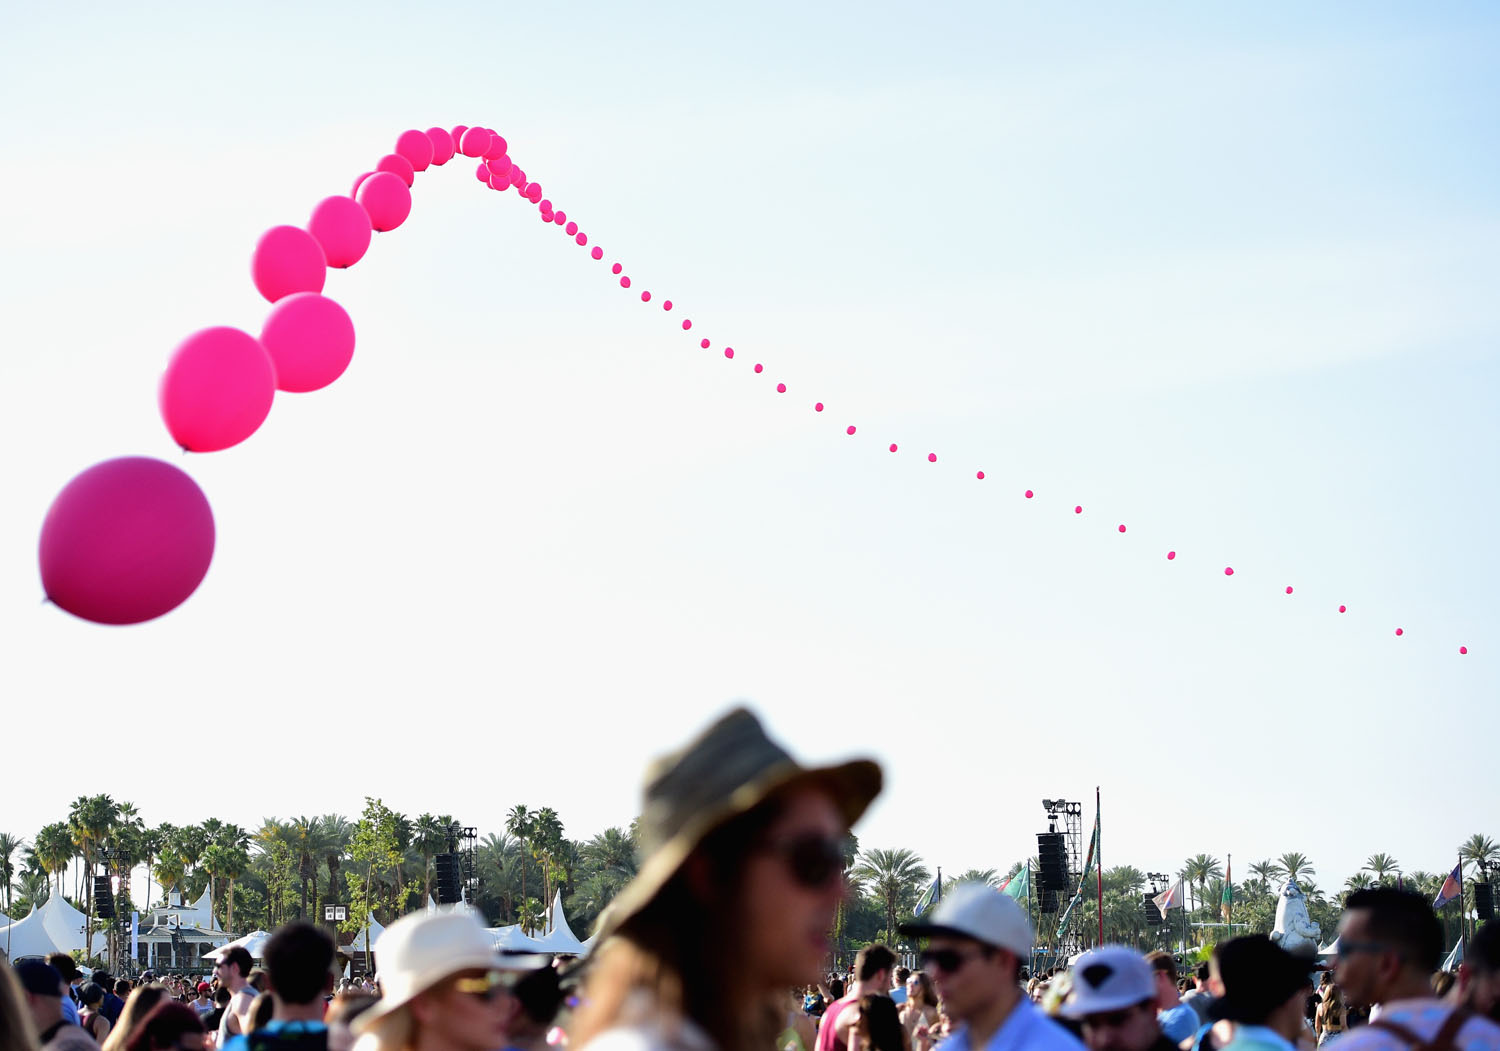 INDIO, CA - APRIL 10: Balloon Chain art installation by Robert Base is seen during during day 1 of the 2015 Coachella Valley Music & Arts Festival (Weekend 1) at the Empire Polo Club on April 10, 2015 in Indio, California.  (Photo by Jason Kempin/Getty Images for Coachella)